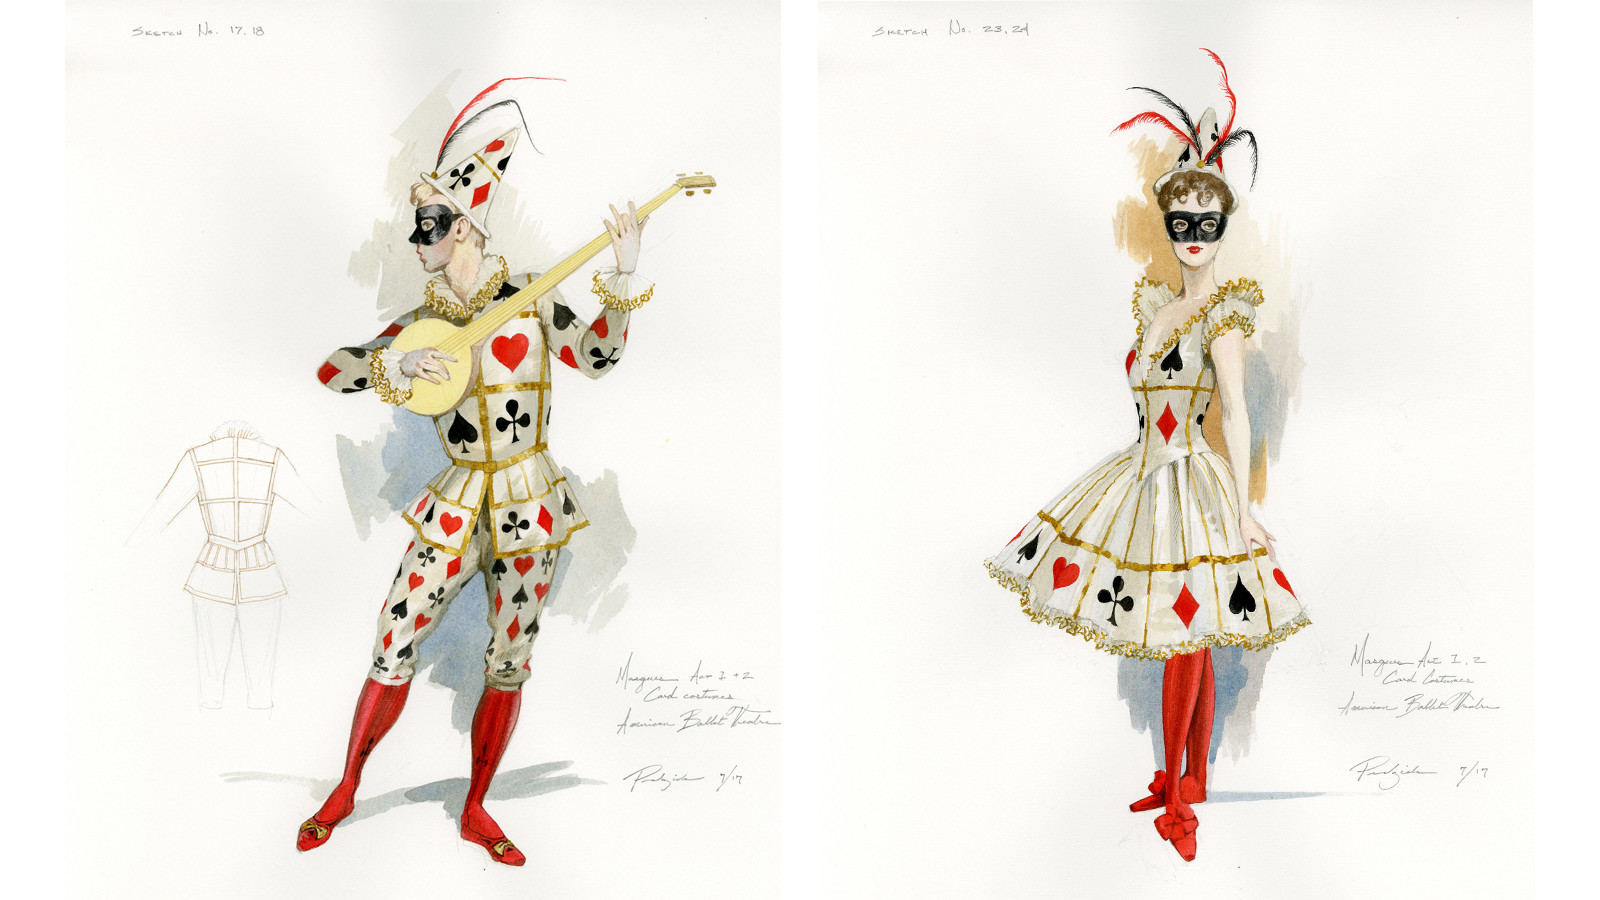 Robert Perdziola's sketches for the Card Man and Card Lady in American Ballet Theatre's "Harlequinade."